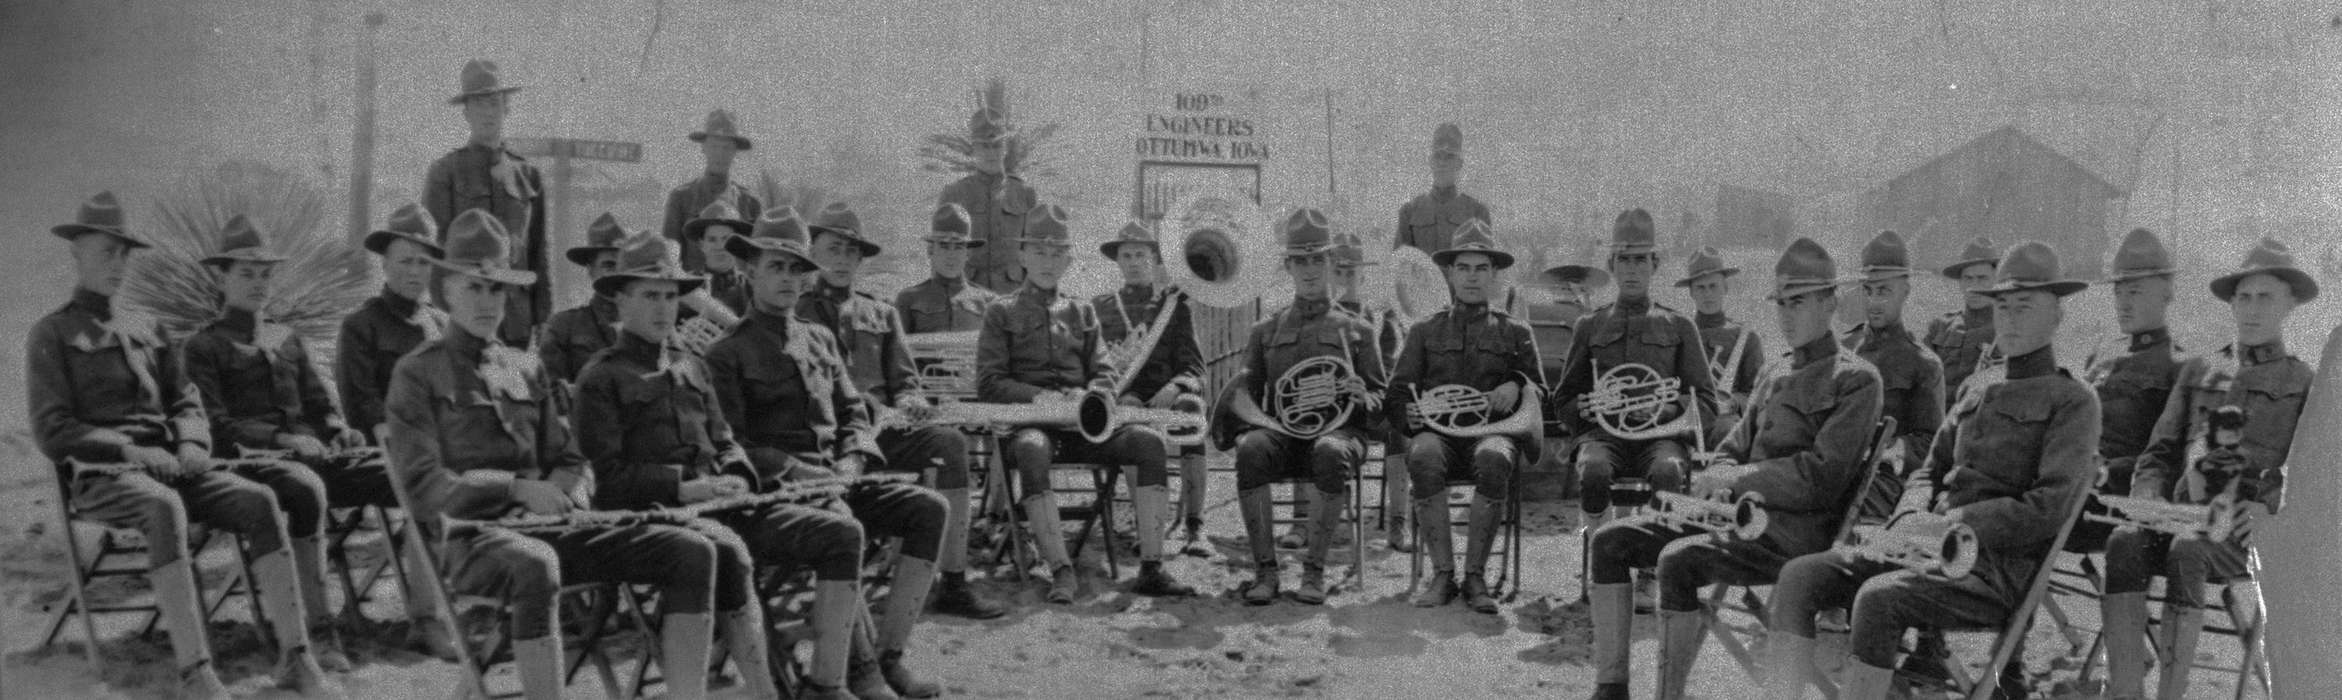 history of Iowa, military, Military and Veterans, flute, trumpet, Lemberger, LeAnn, USA, Portraits - Group, tuba, band, Iowa, Iowa History, french horn